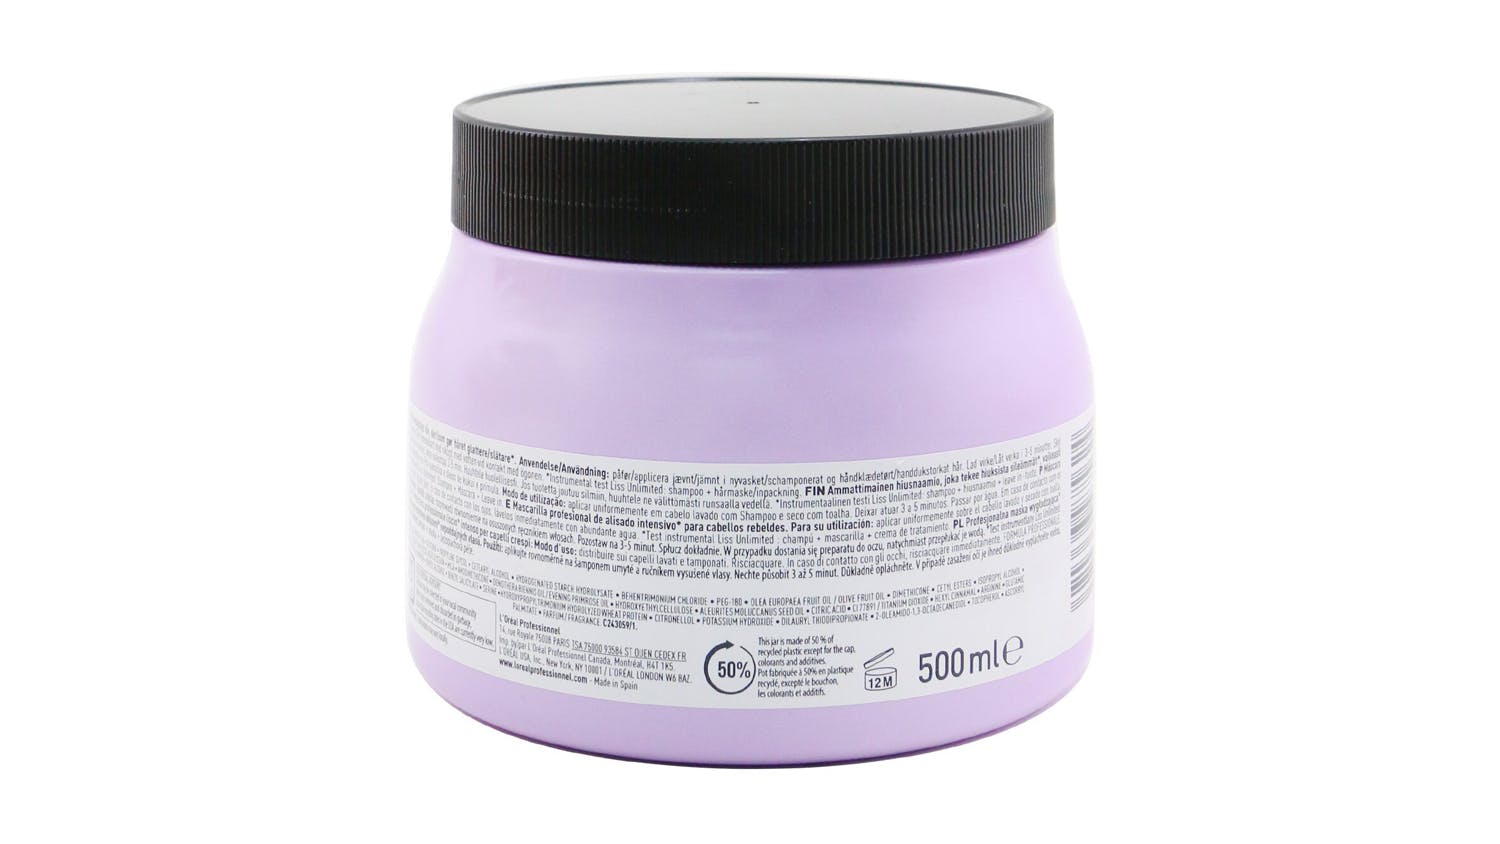 Professionnel Serie Expert - Liss Unlimited Prokeratin Intense Smoothing Mask (For Unruly Hair) - 500ml/16.9oz